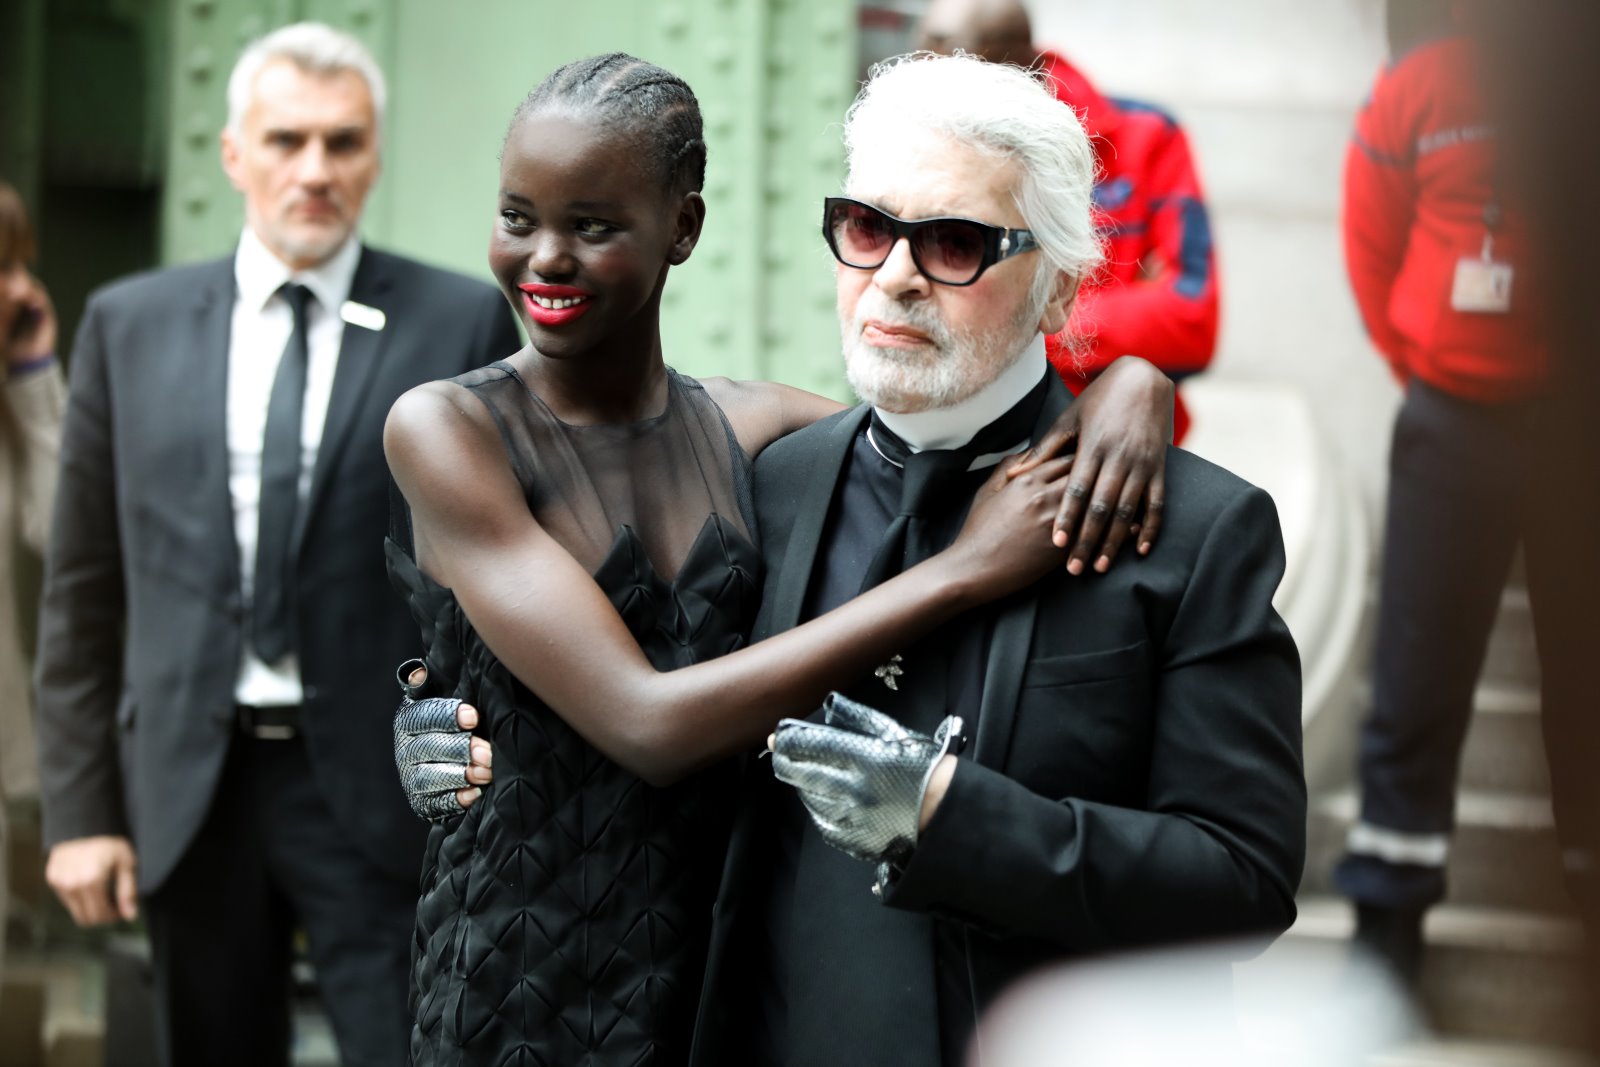 Karl Lagerfeld dead at 85, according to French media – Lucire